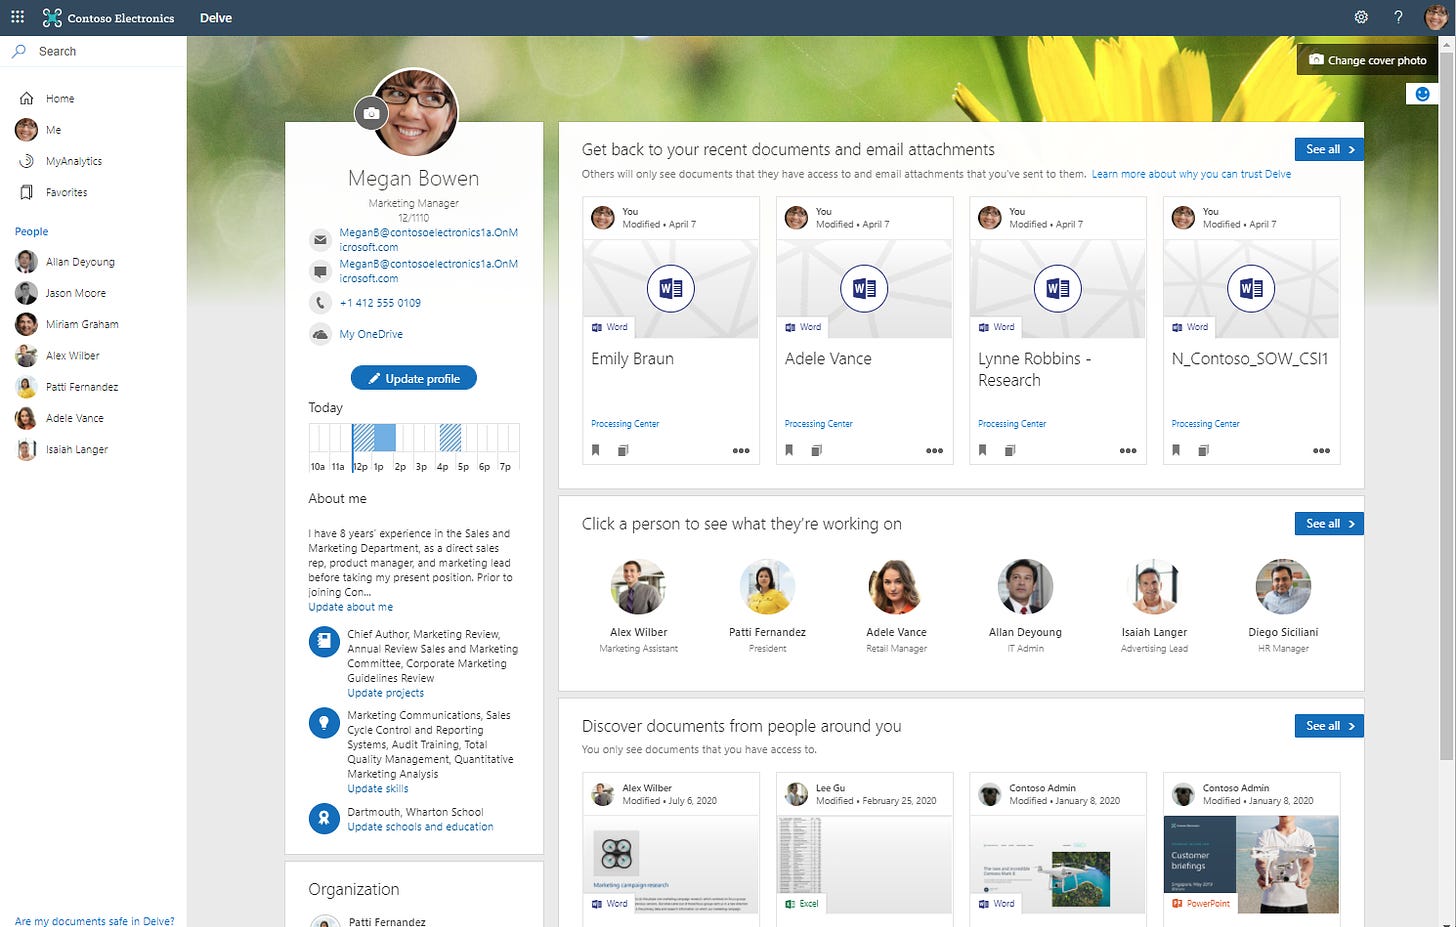 The My Office profile experience displays a person’s contact information, recent documents, their free/busy calendar information, their organization structure, people working around them, and more.